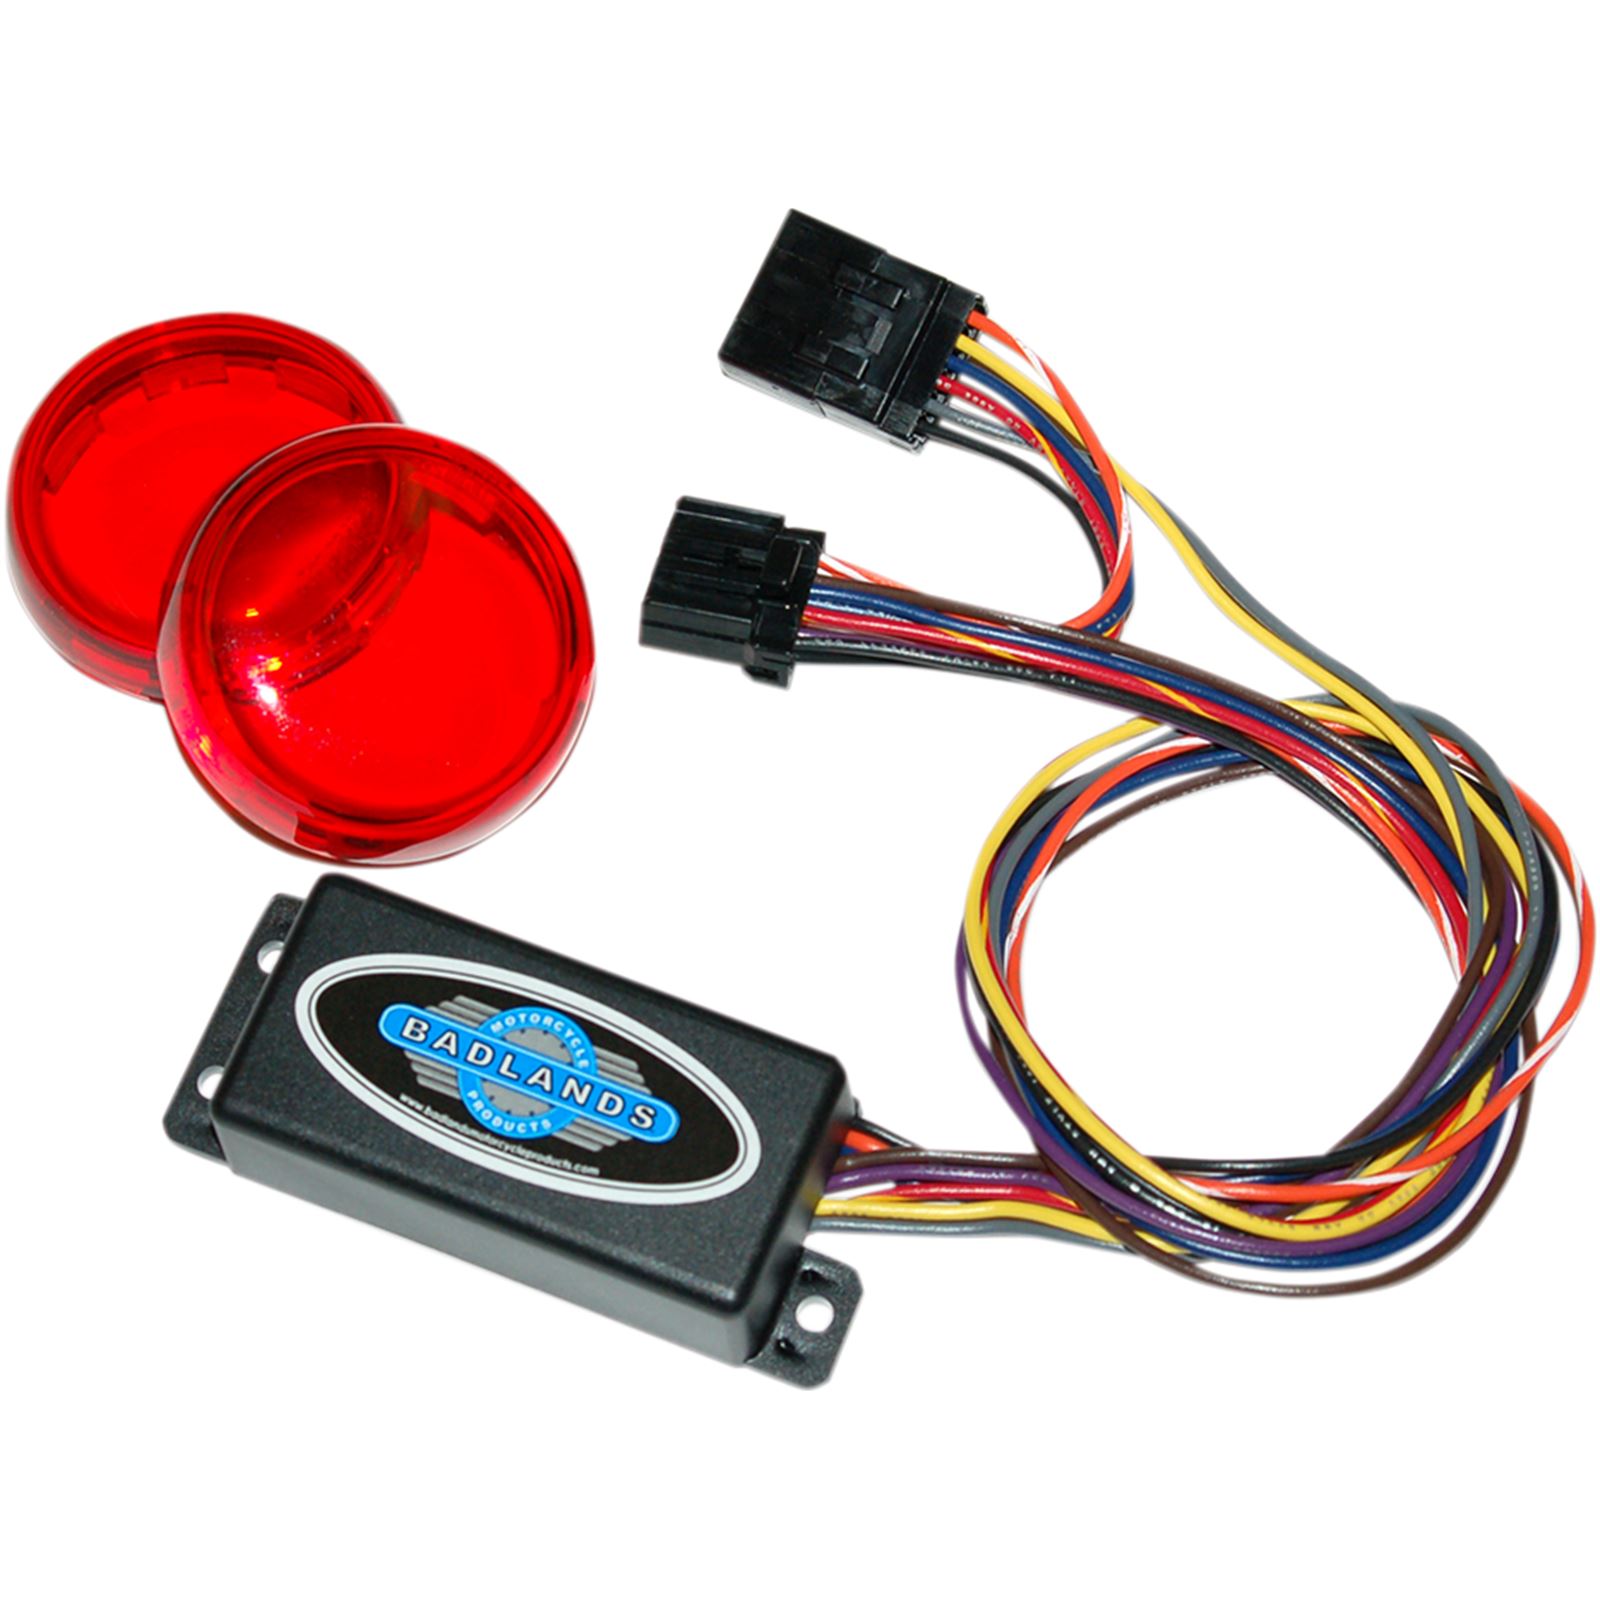 Badlands M/C Products Plug-In Illuminator with Red Lenses - XL